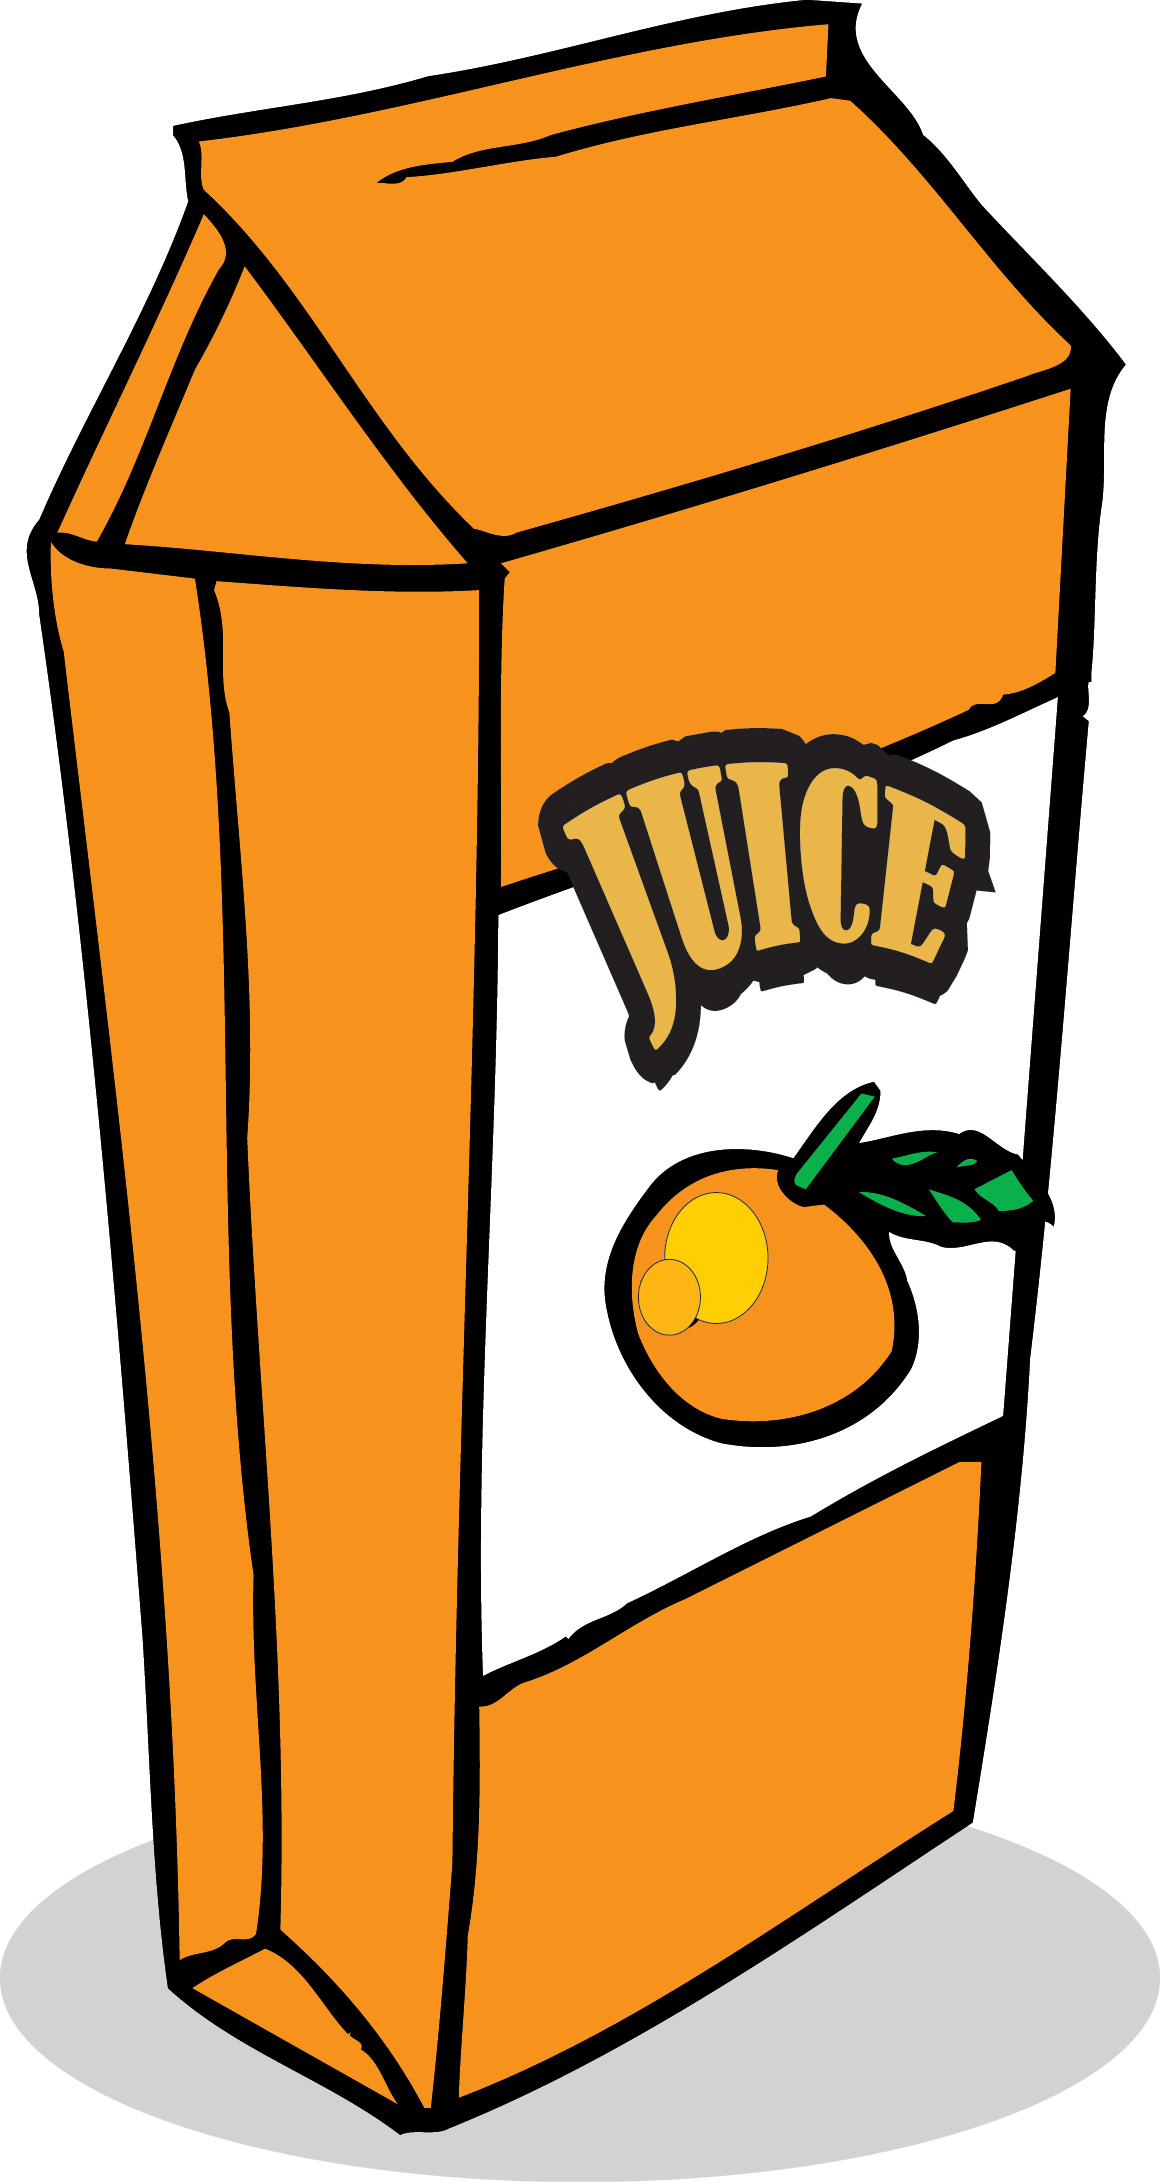 Displaying 20 Images For Juice Carton Clip Art